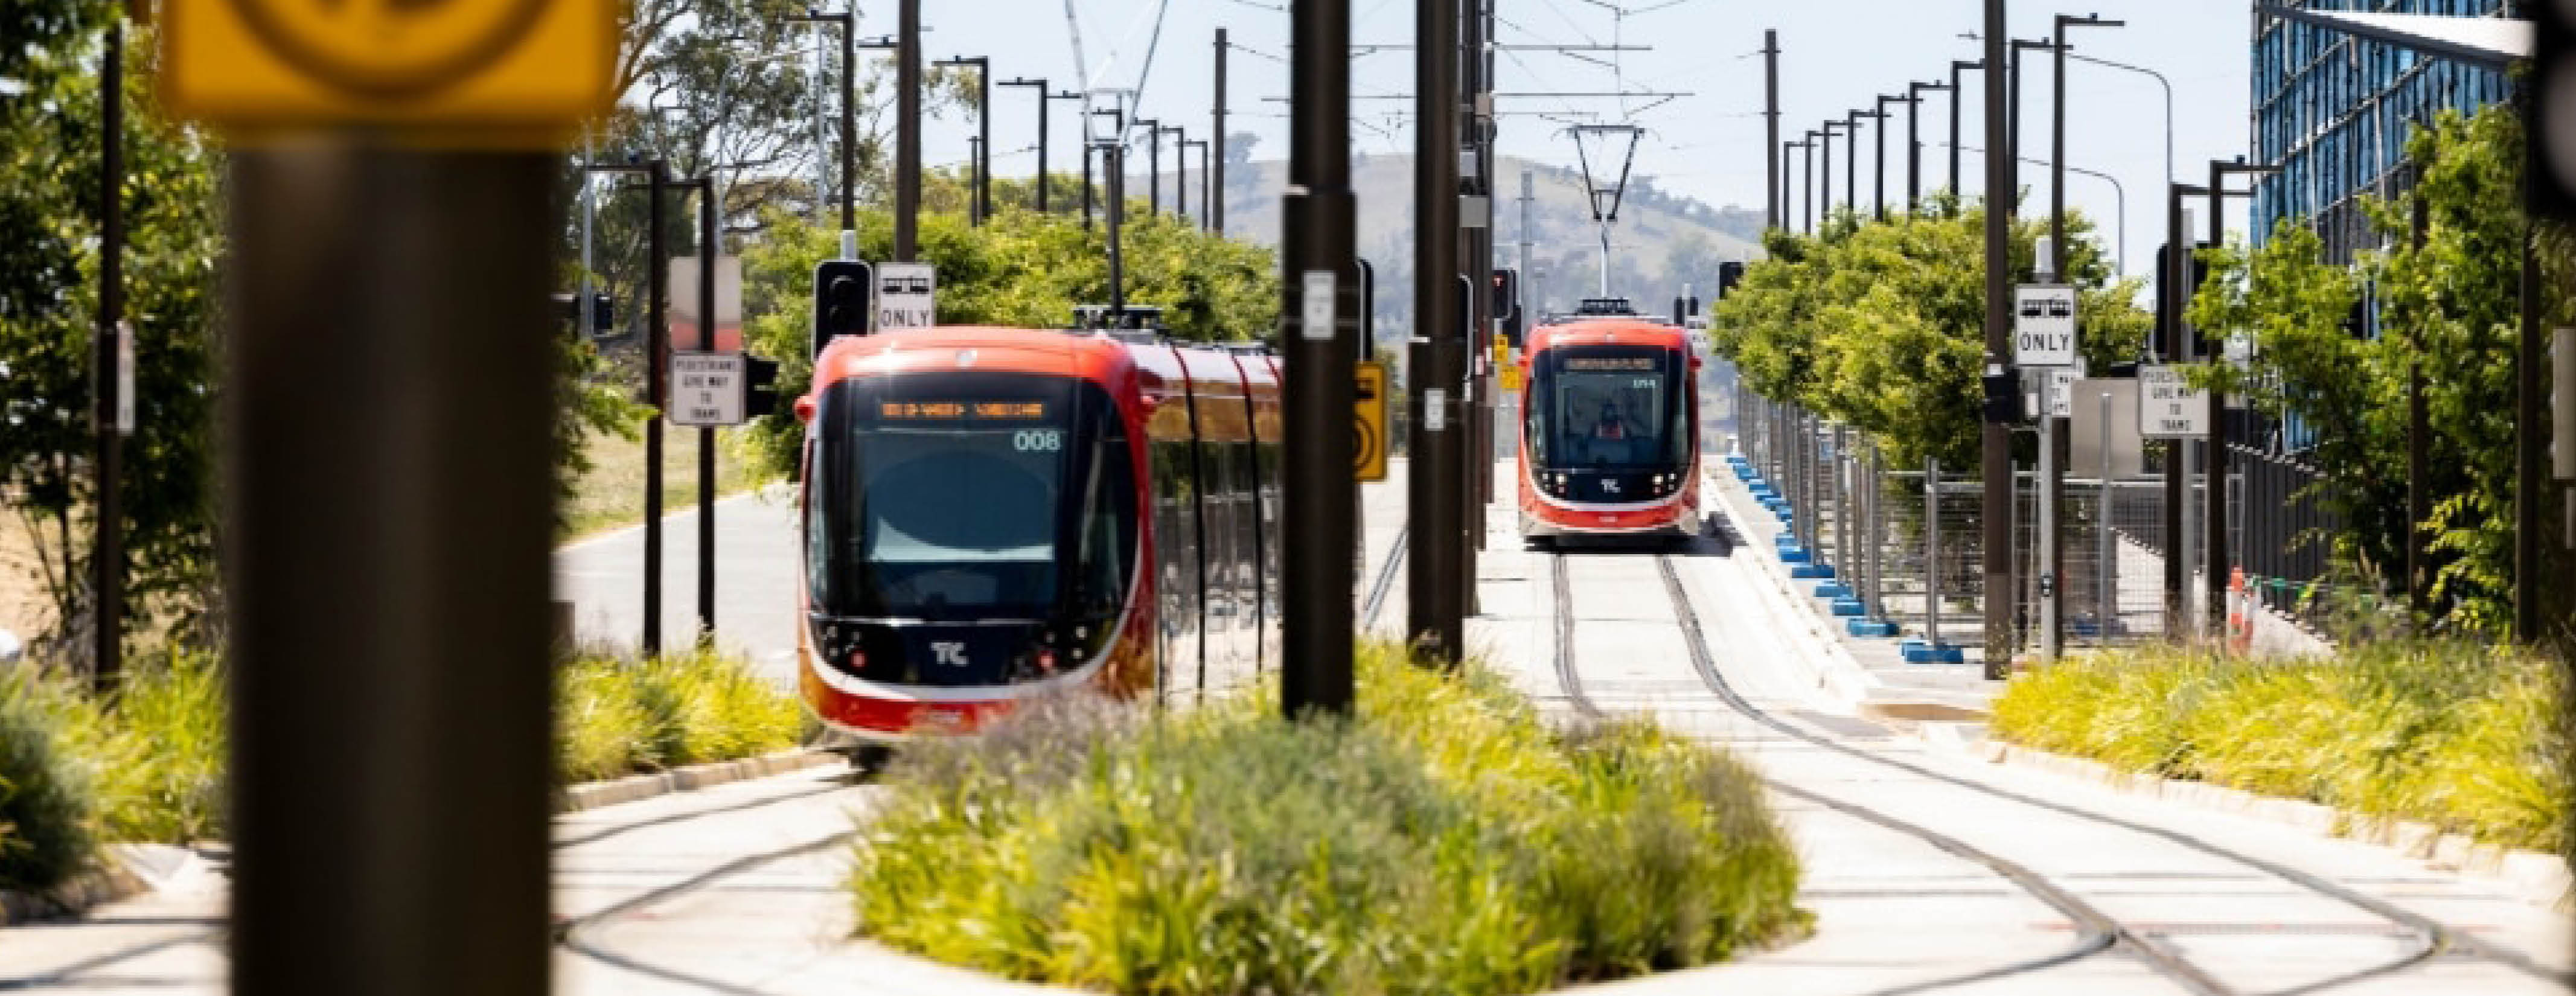 Two light rail vehicles crossing paths in Gungahlin ACT